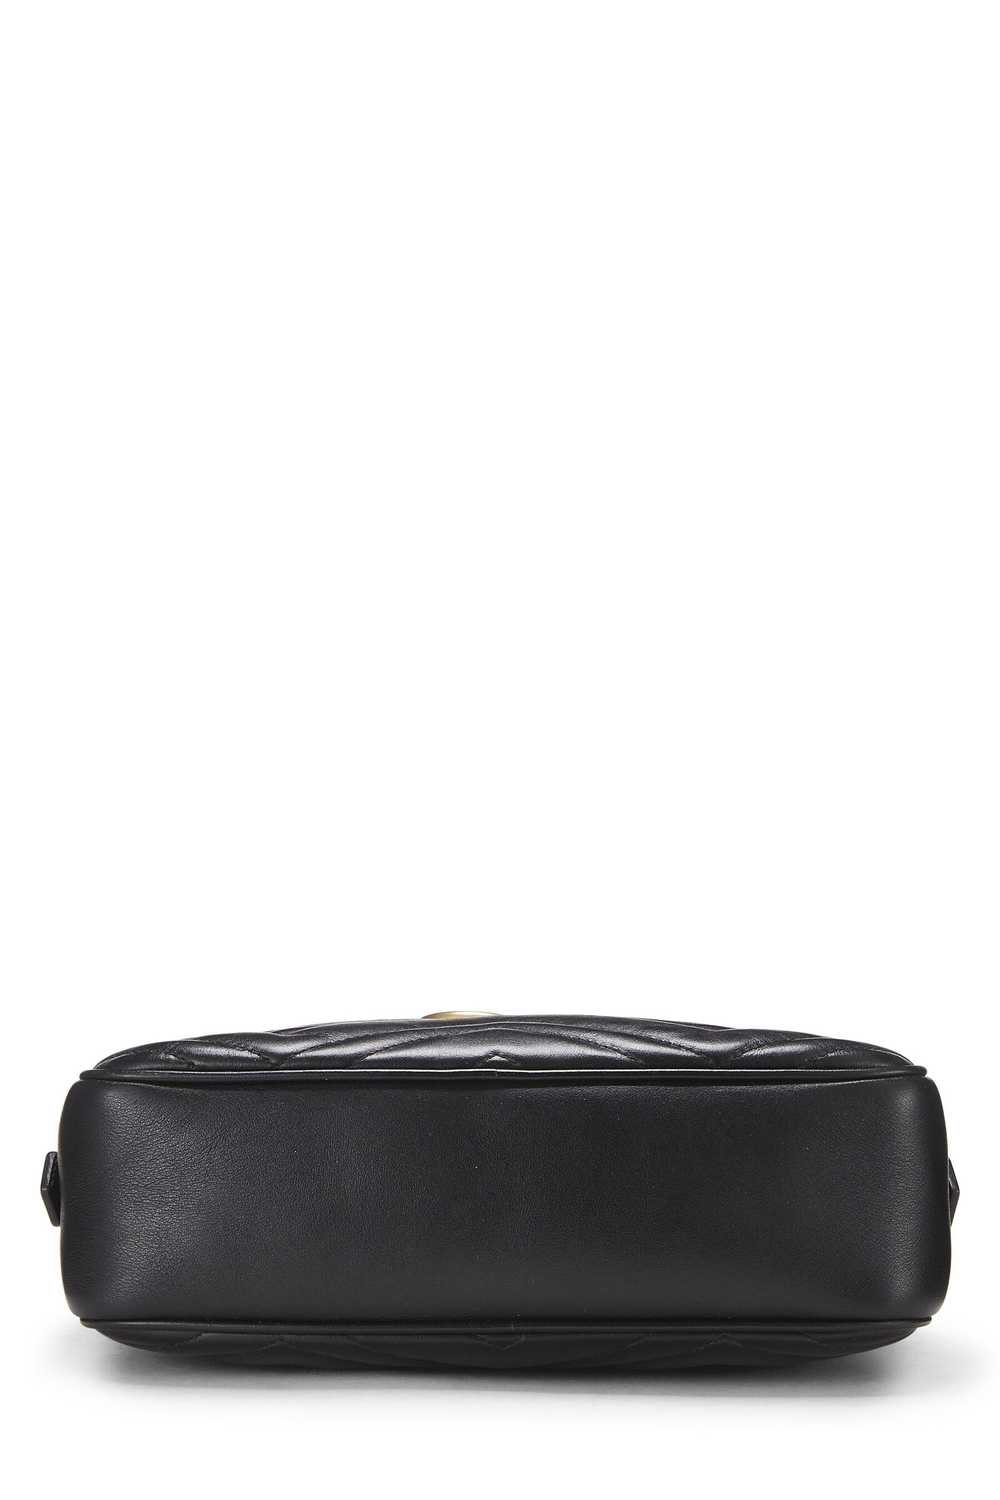 Black Leather GG Marmont Crossbody Small - image 5